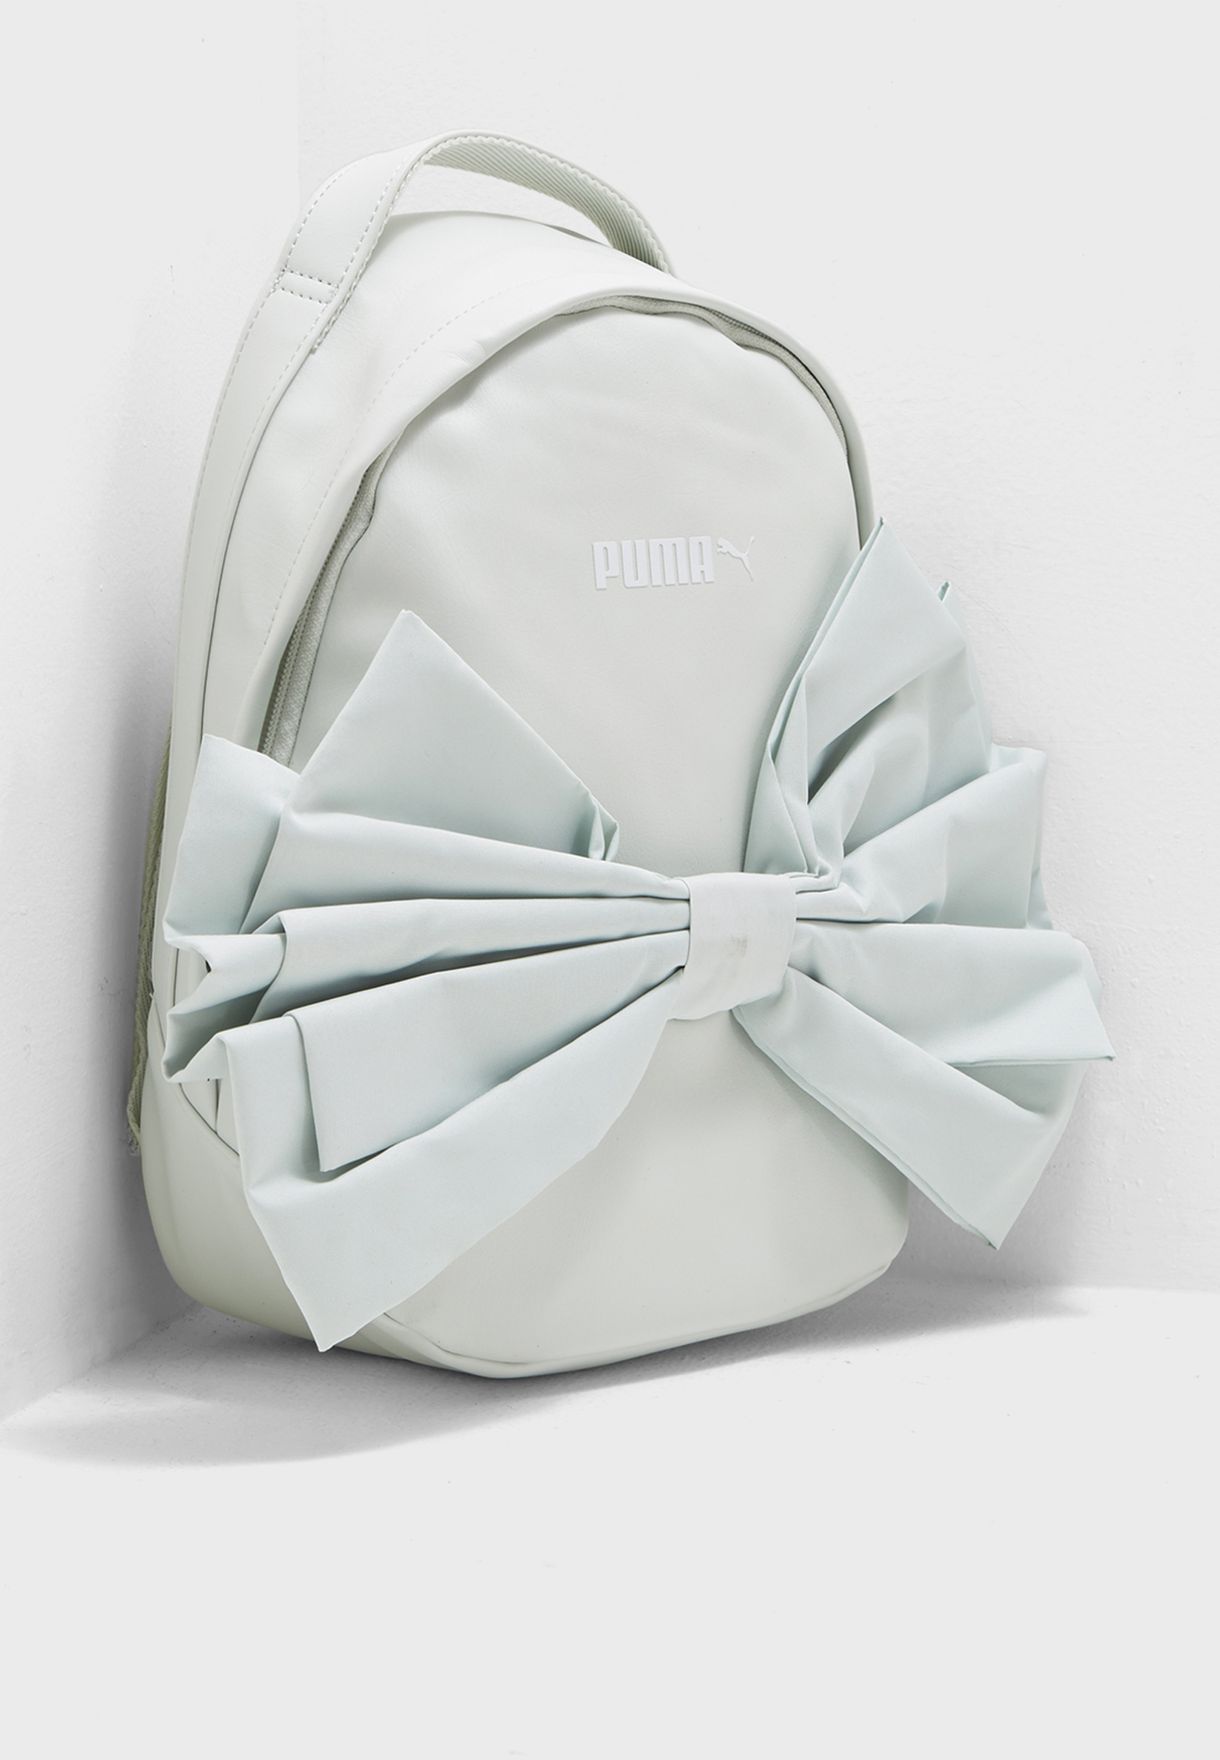 puma archive bow backpack